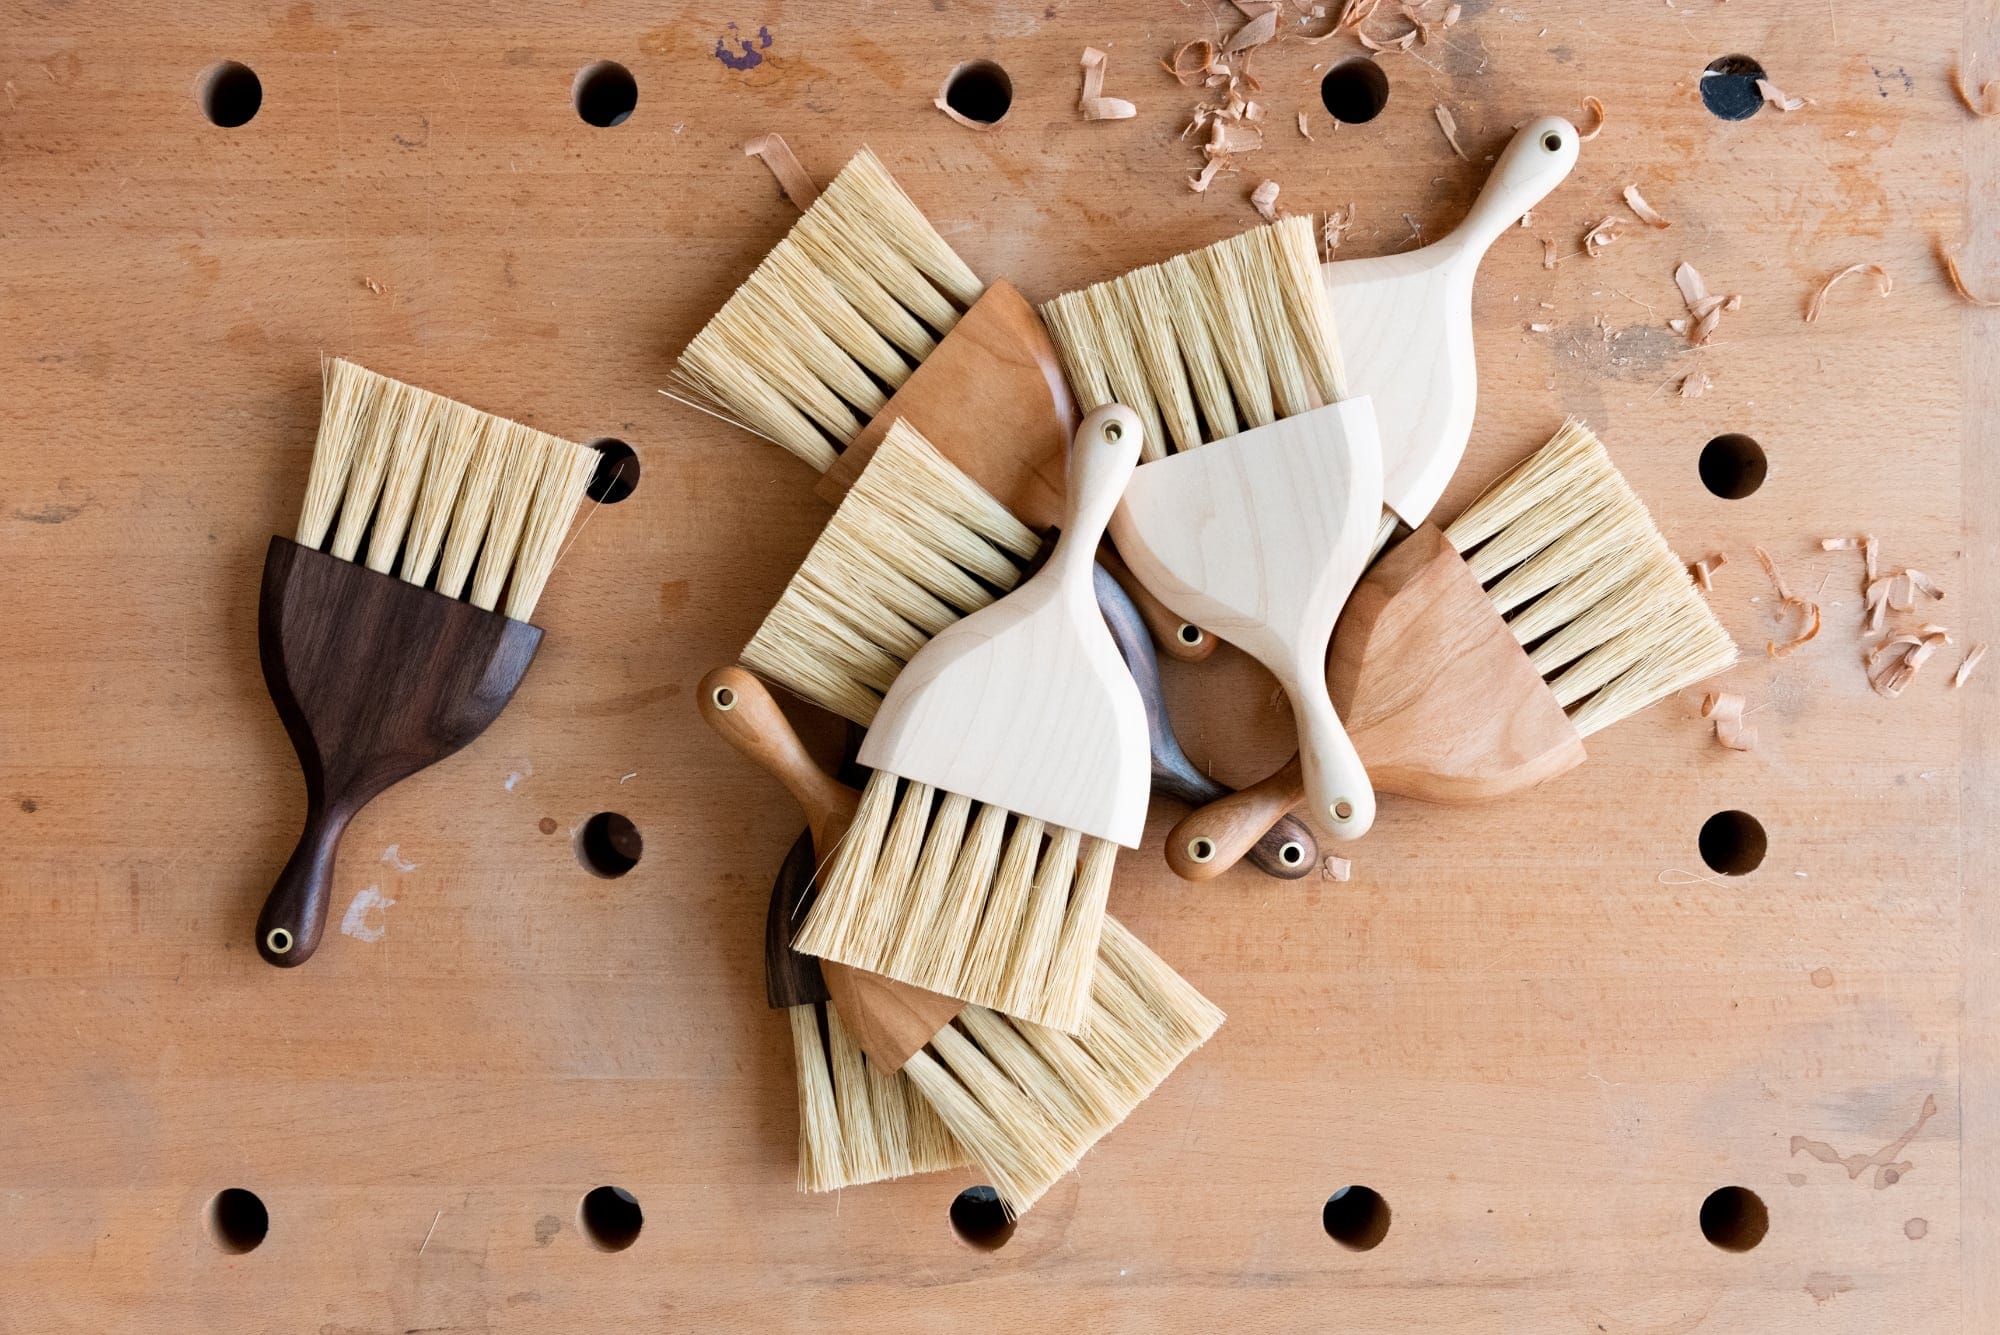 a pile of small hand-held brushes made with a variety of woods on a wooden surface with holes and wood shavings